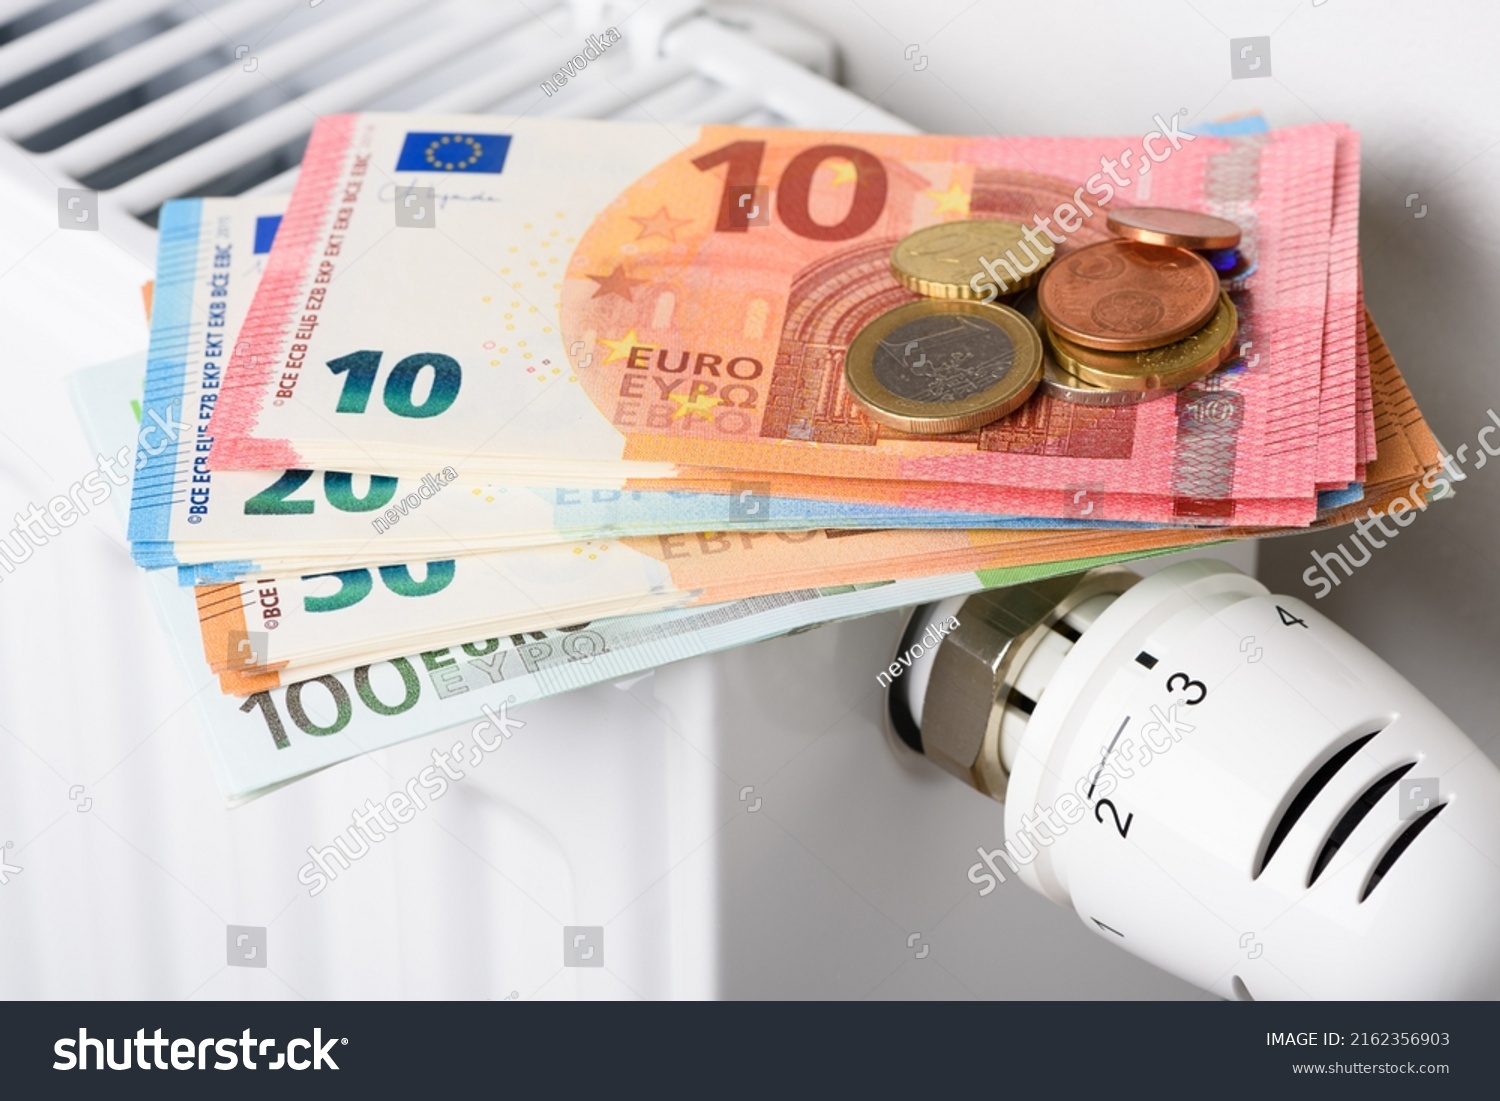 Euro money banknotes on heating radiator battery with thermostat temperature regulator. Concept of expensive heating costs and rising energy bill prices for winter cold season. #2162356903